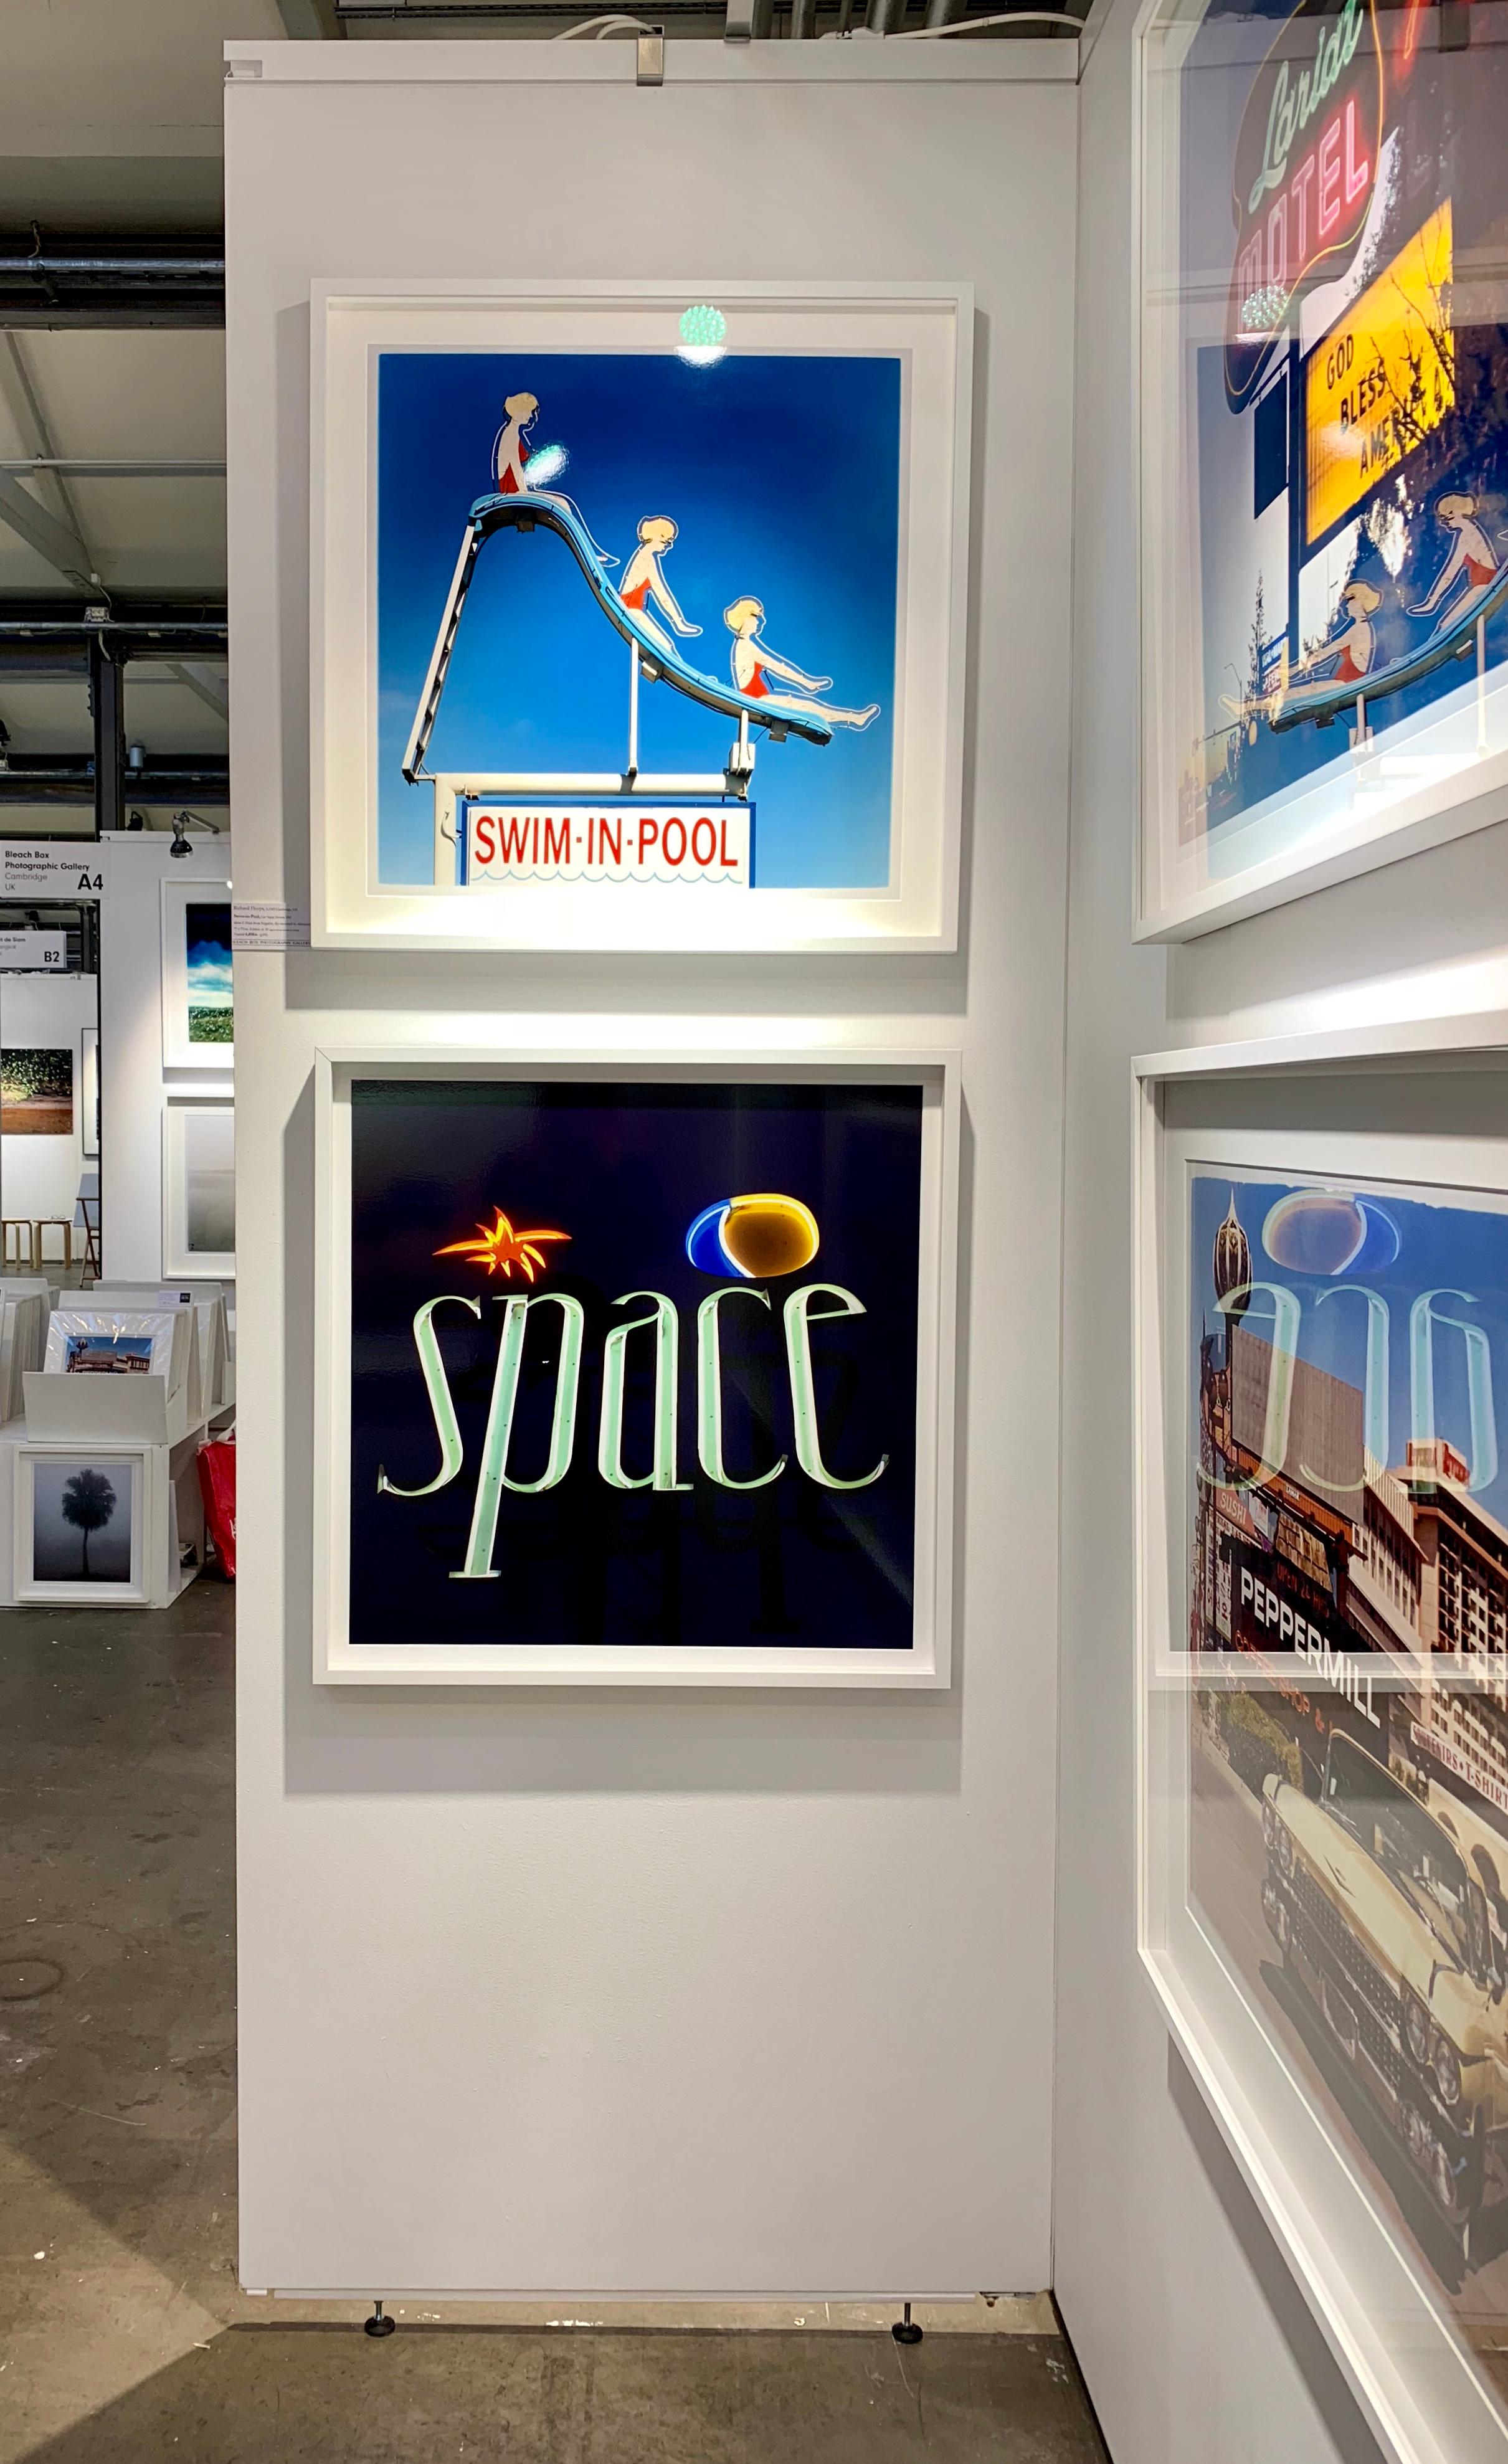 Space, Ibiza, the Balearic Islands Framed - Contemporary Colour Sign Photography 2